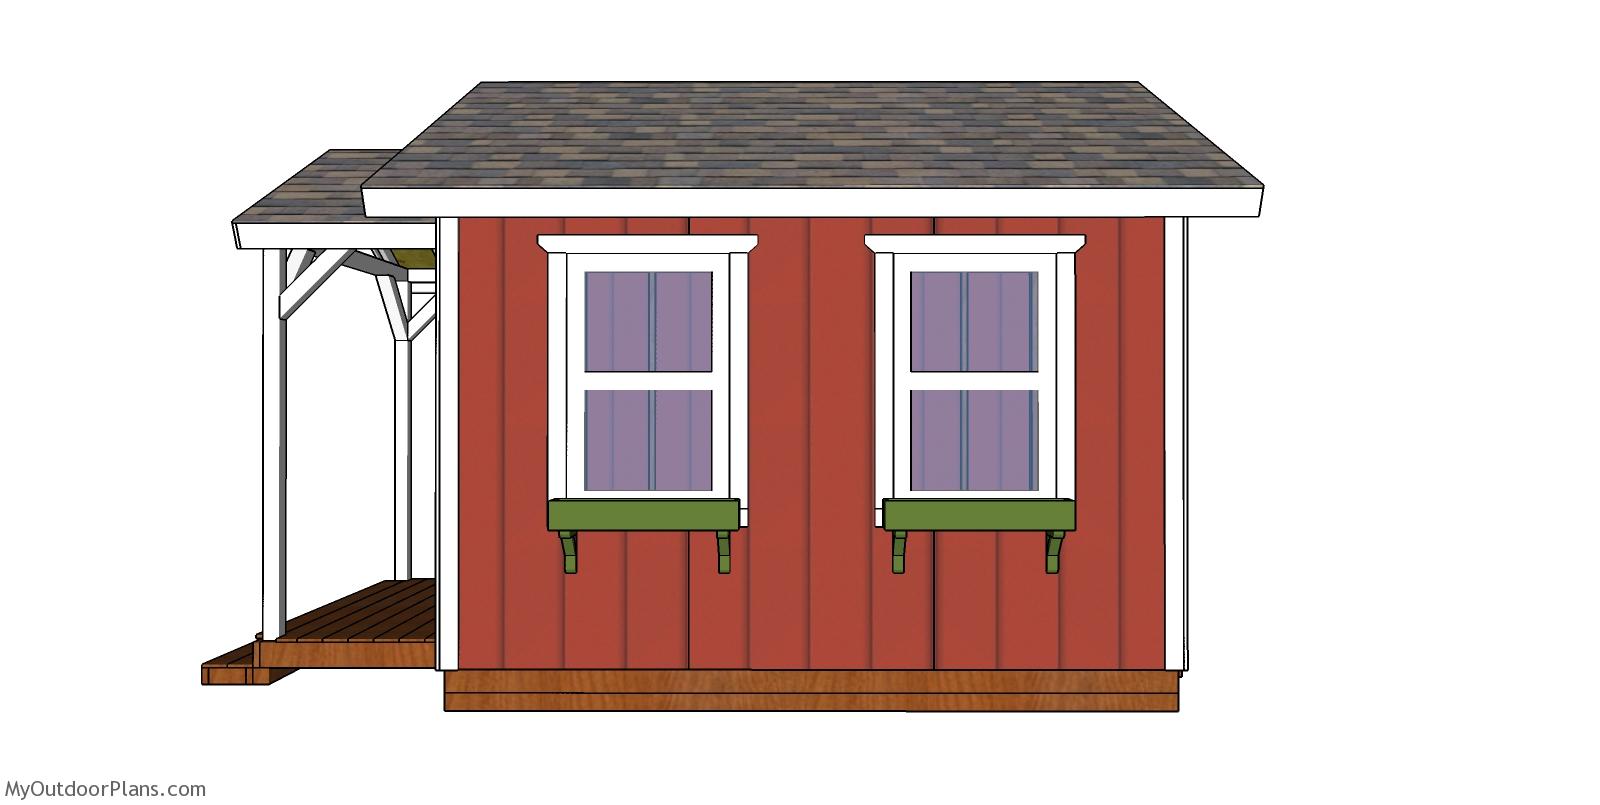 MyOutdoorPlans Free Woodworking Plans and Projects, DIY Shed, Wooden Playhouse, Pergola, Bbq